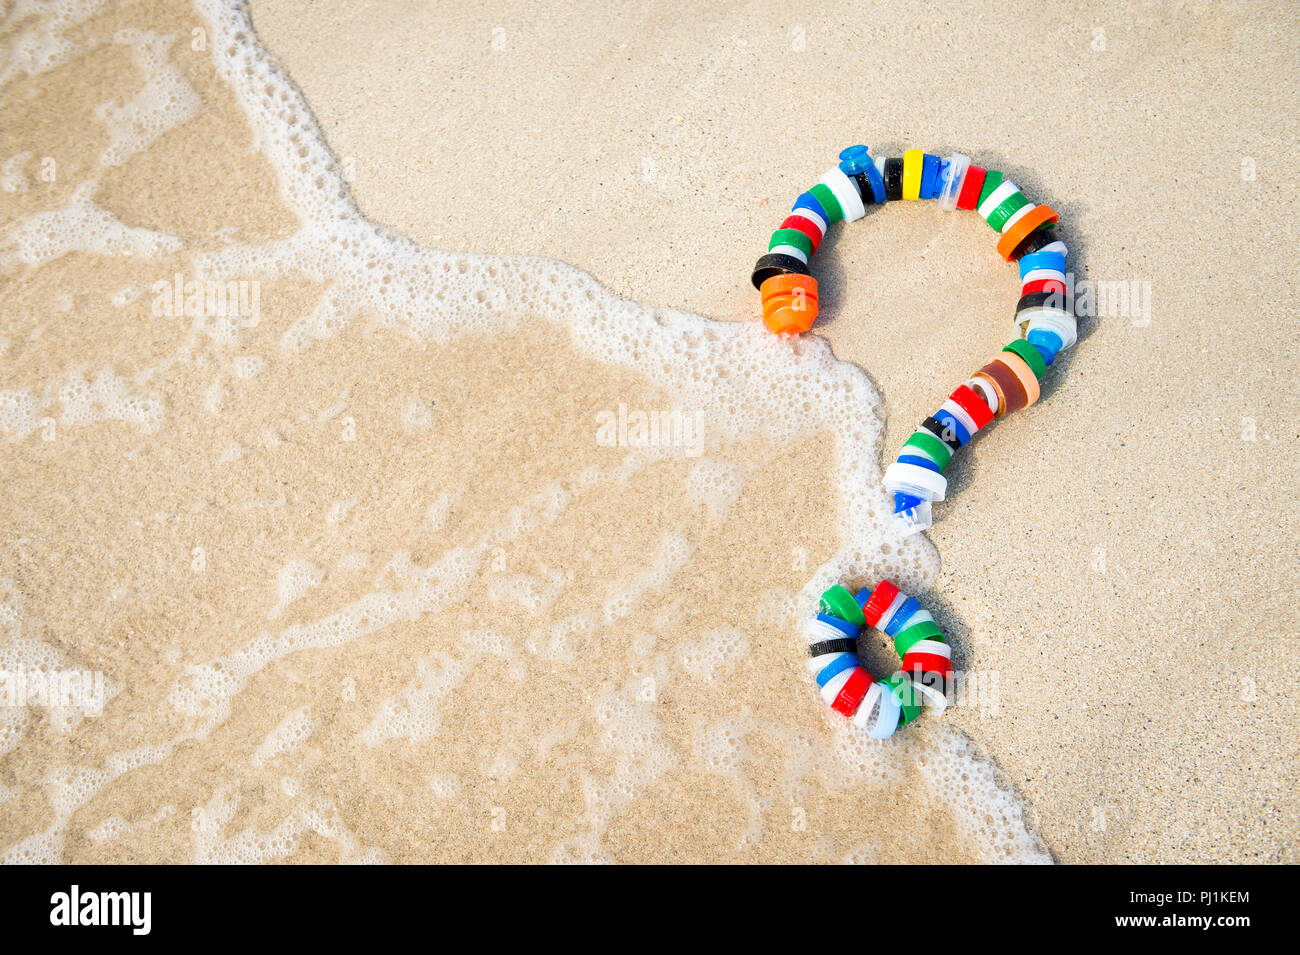 Colorful bottle caps in the shape of a question mark on a sandy beach as a wave washes up. Take action on pollution - reduce, reuse and recycle Stock Photo